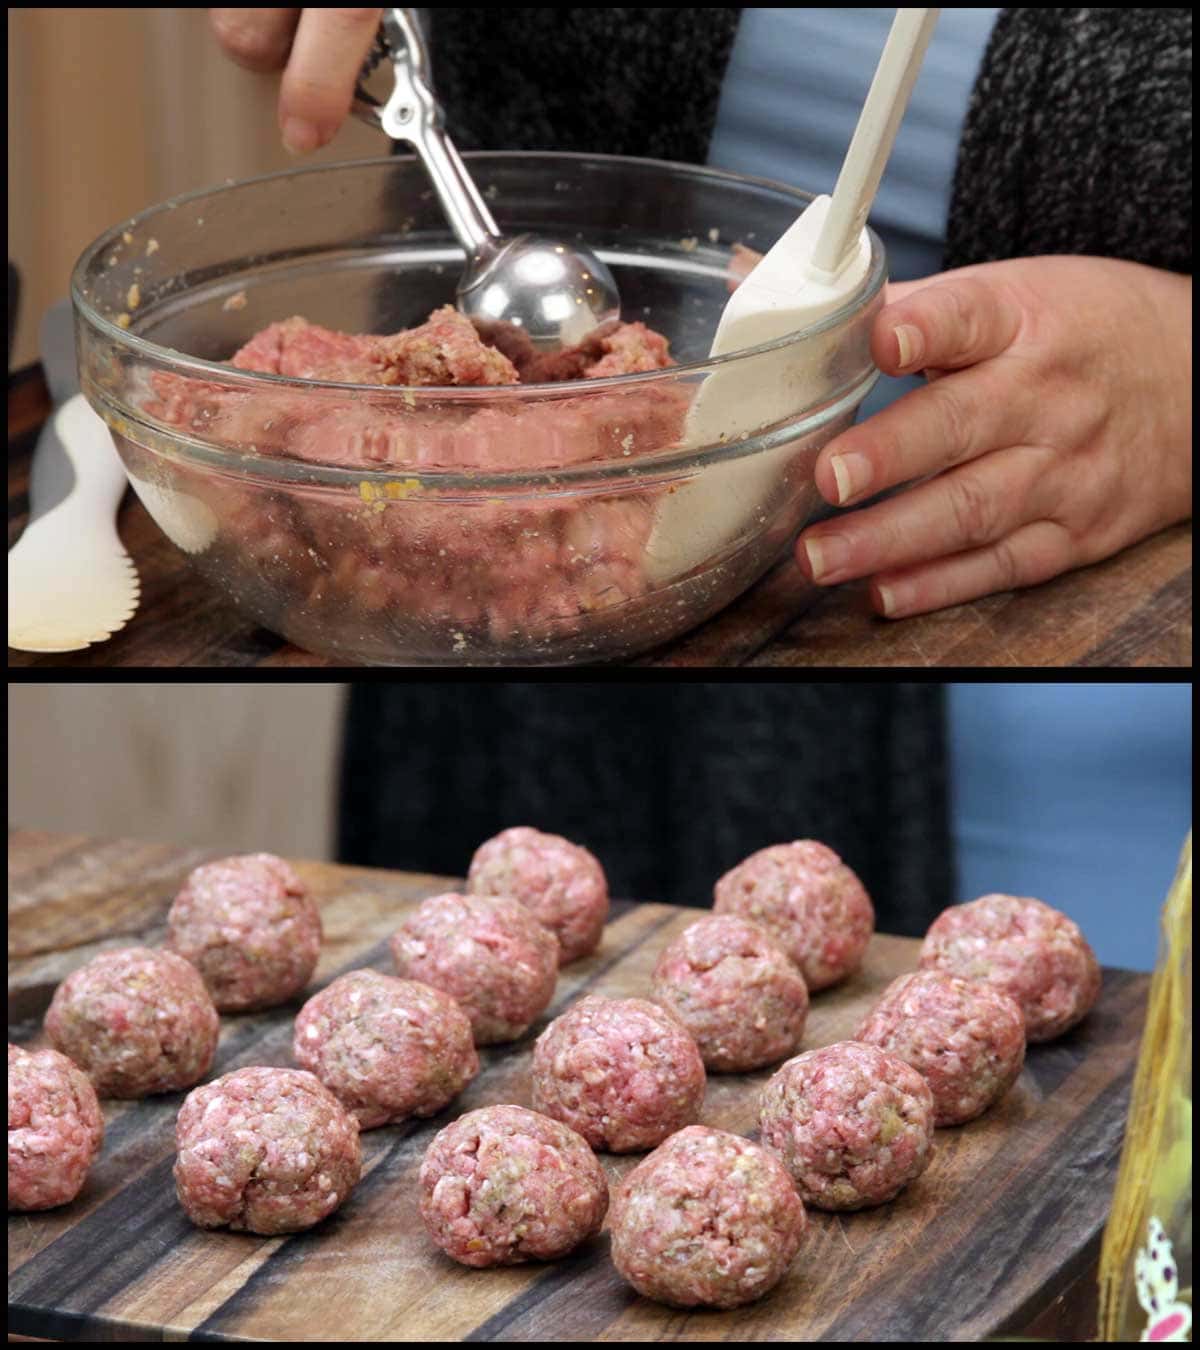 Forming the meatballs and placing them on a cutting board